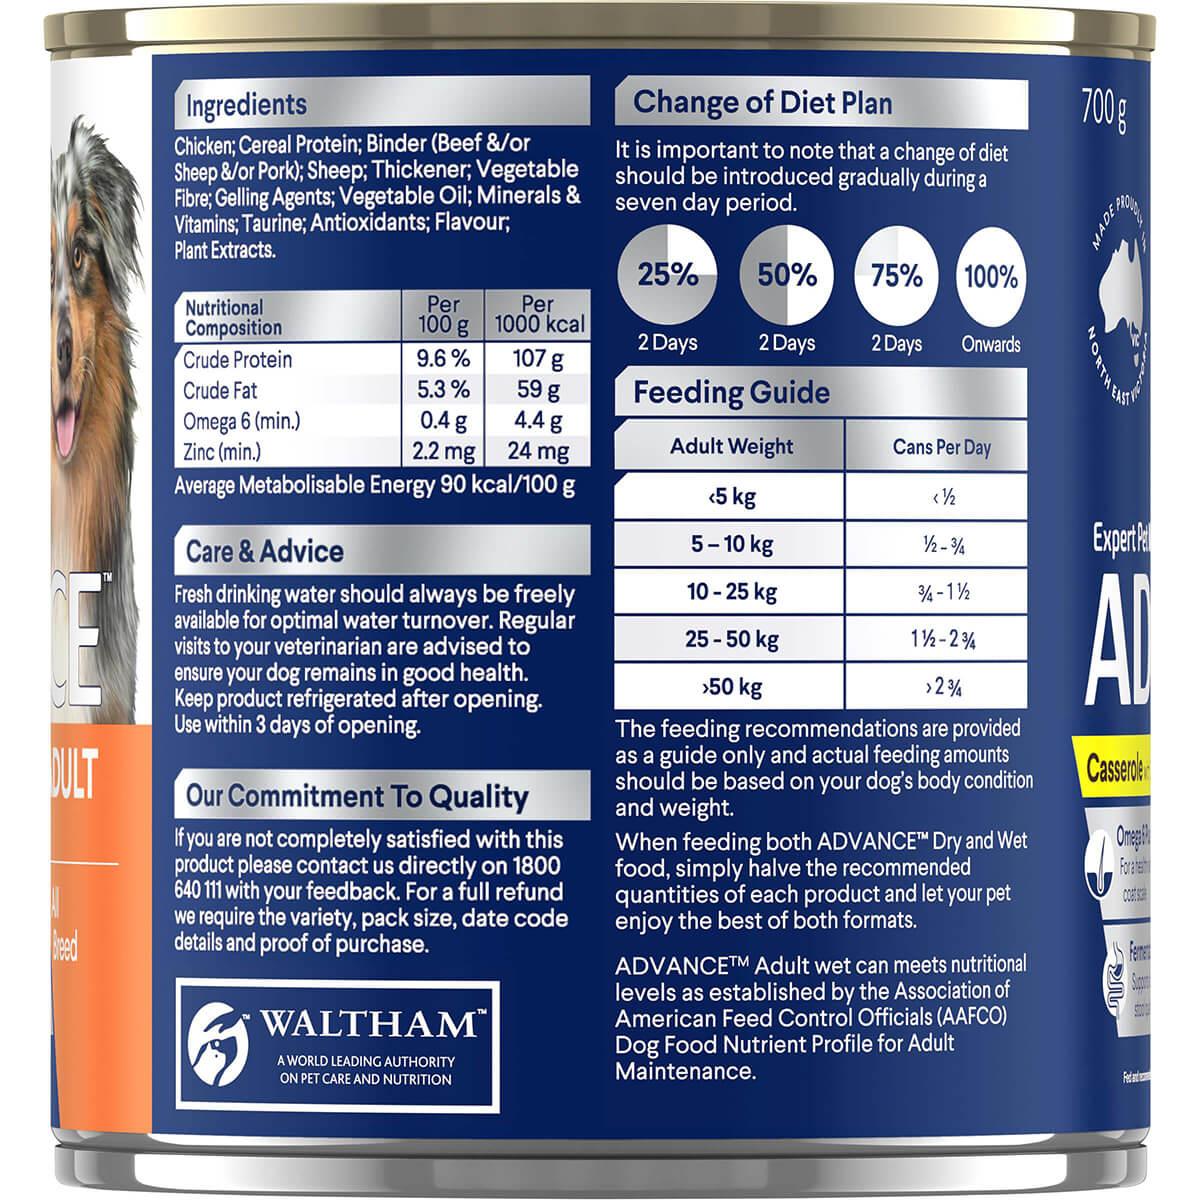 Advance Adult Casserole with Chicken Wet Dog Food